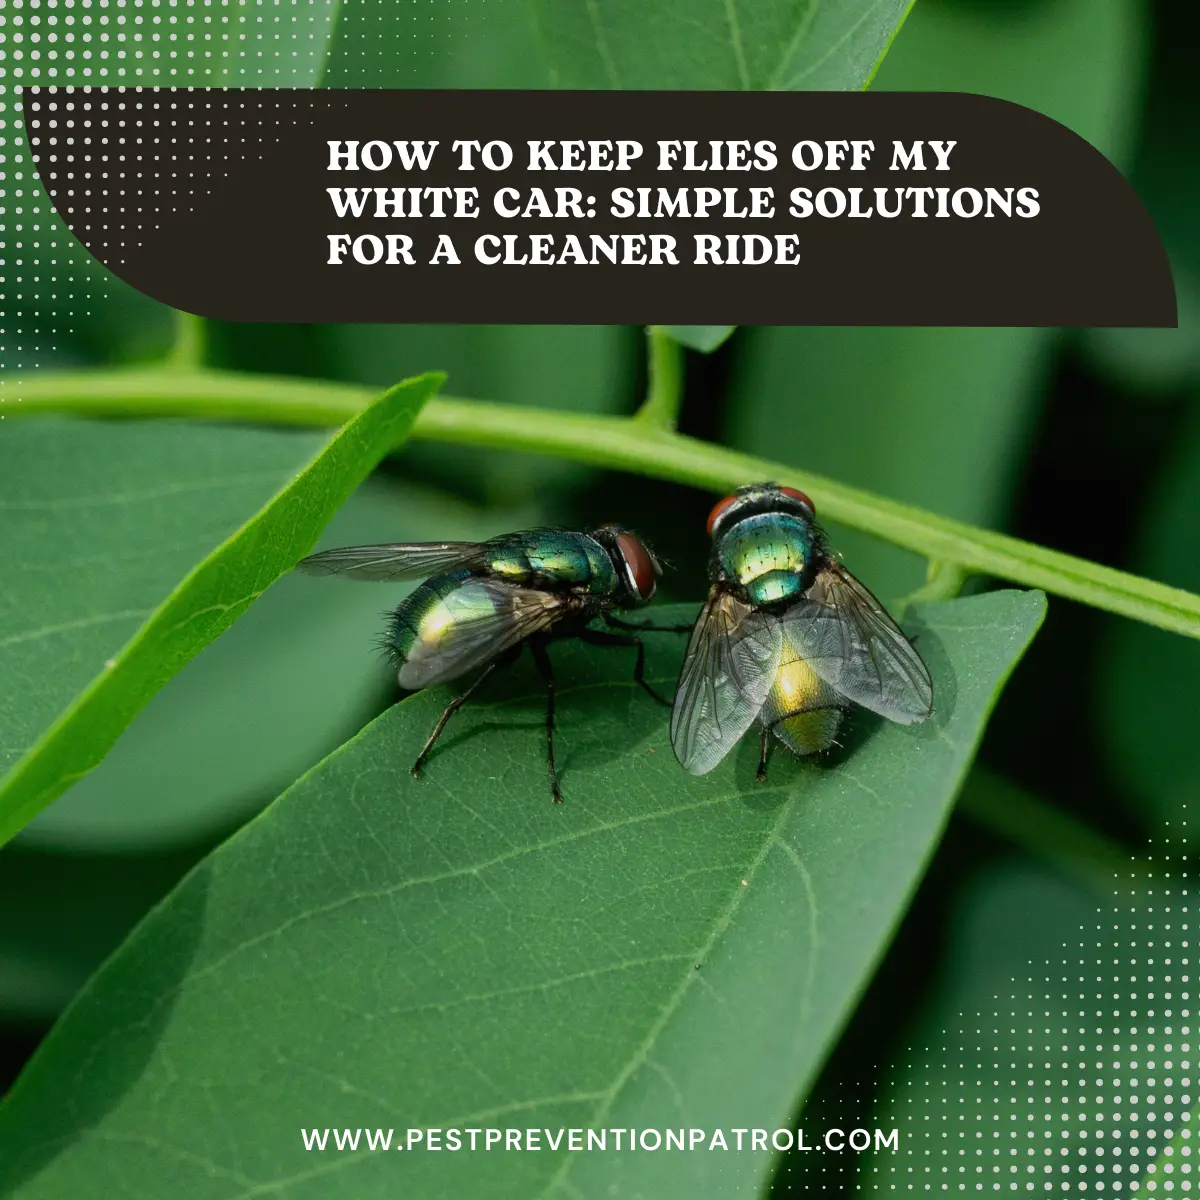 How to Keep Flies Off My White Car_ Simple Solutions for a Cleaner Ride